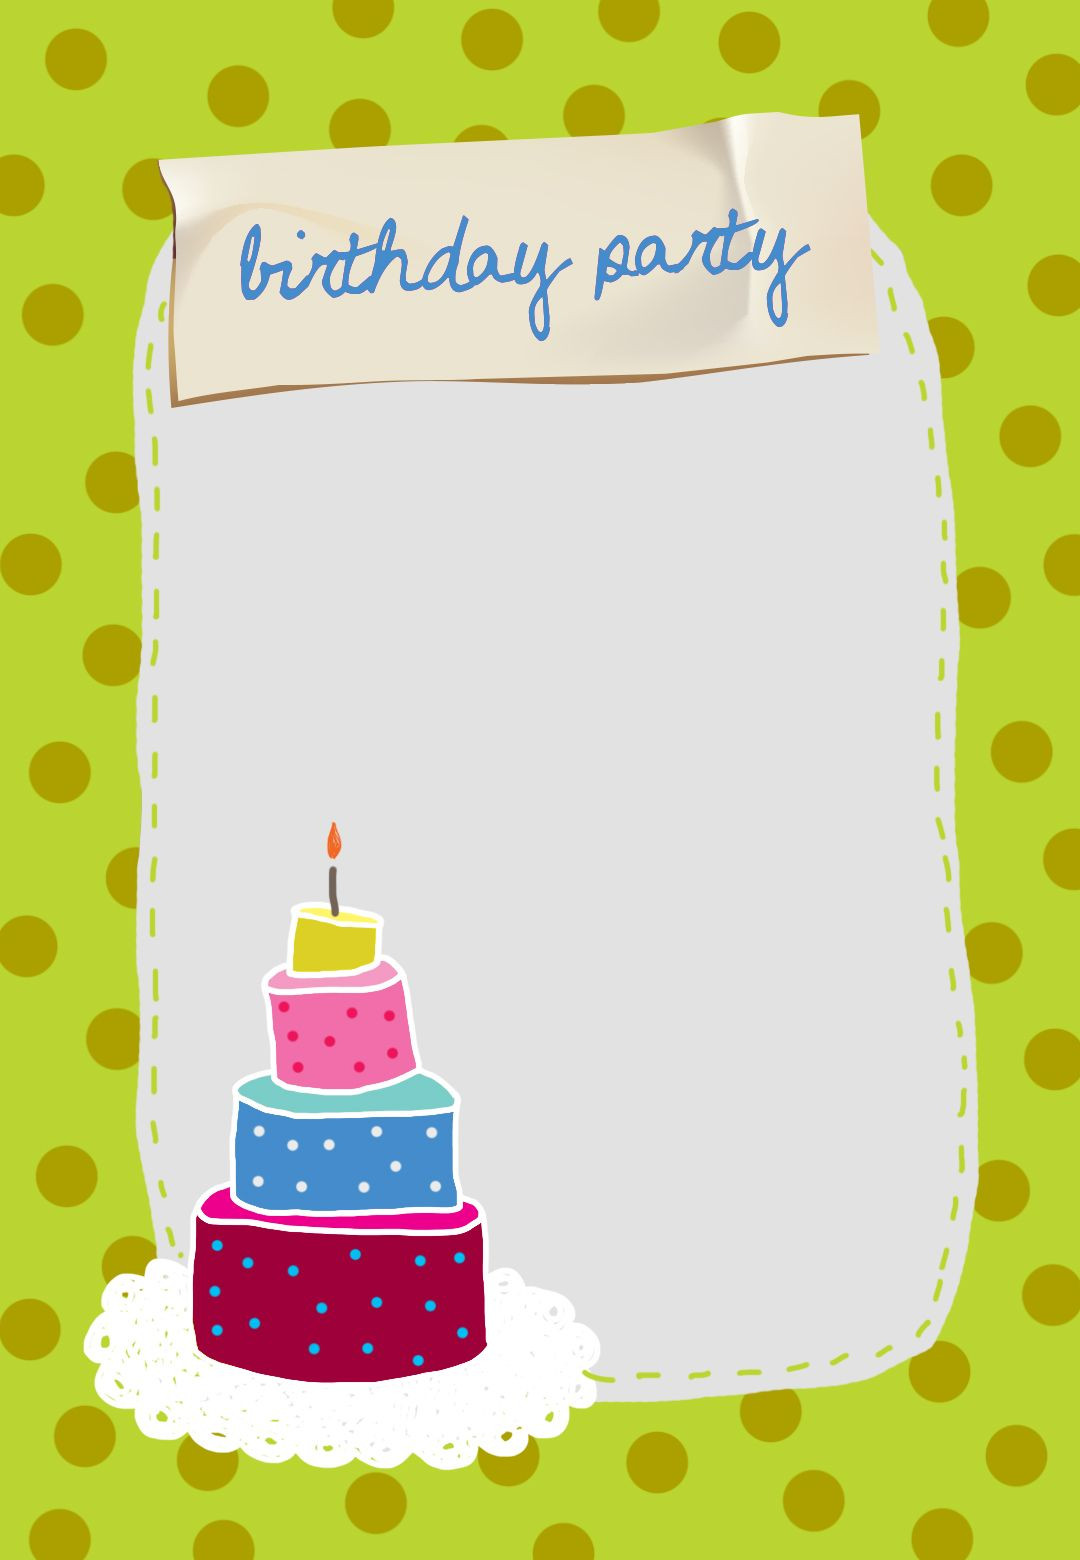 Order Birthday Invitations Online
 Birthday Party Invitation Customize add text and photos